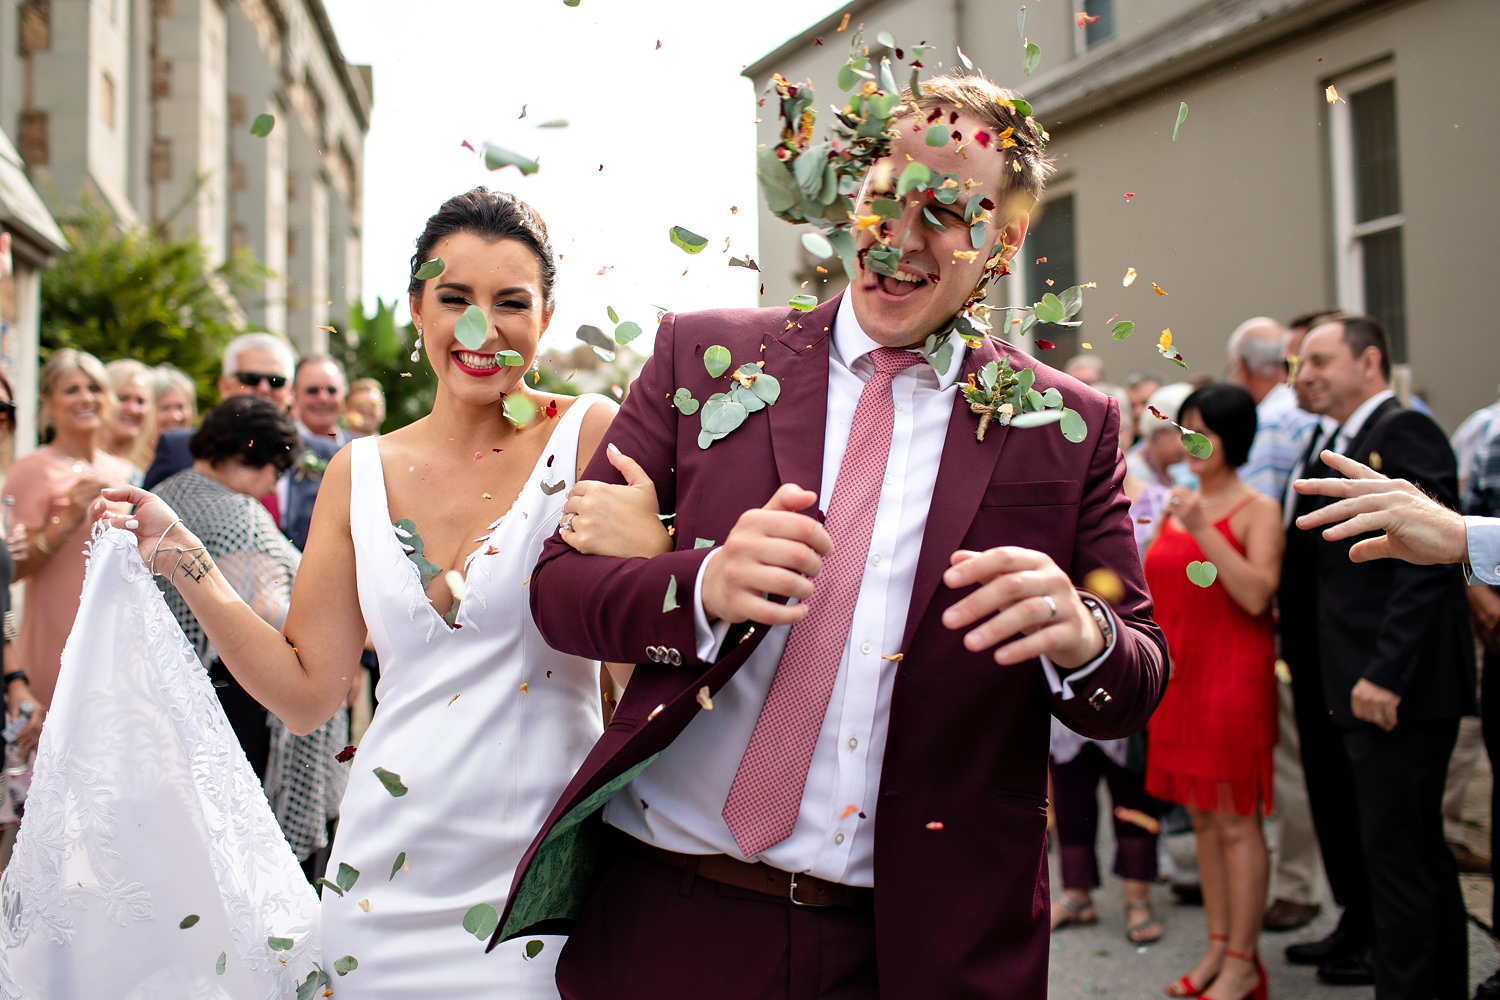 The groom gets a face full of pennygum confetti and rose petals at their wedding in South Africa by photographer Niki M